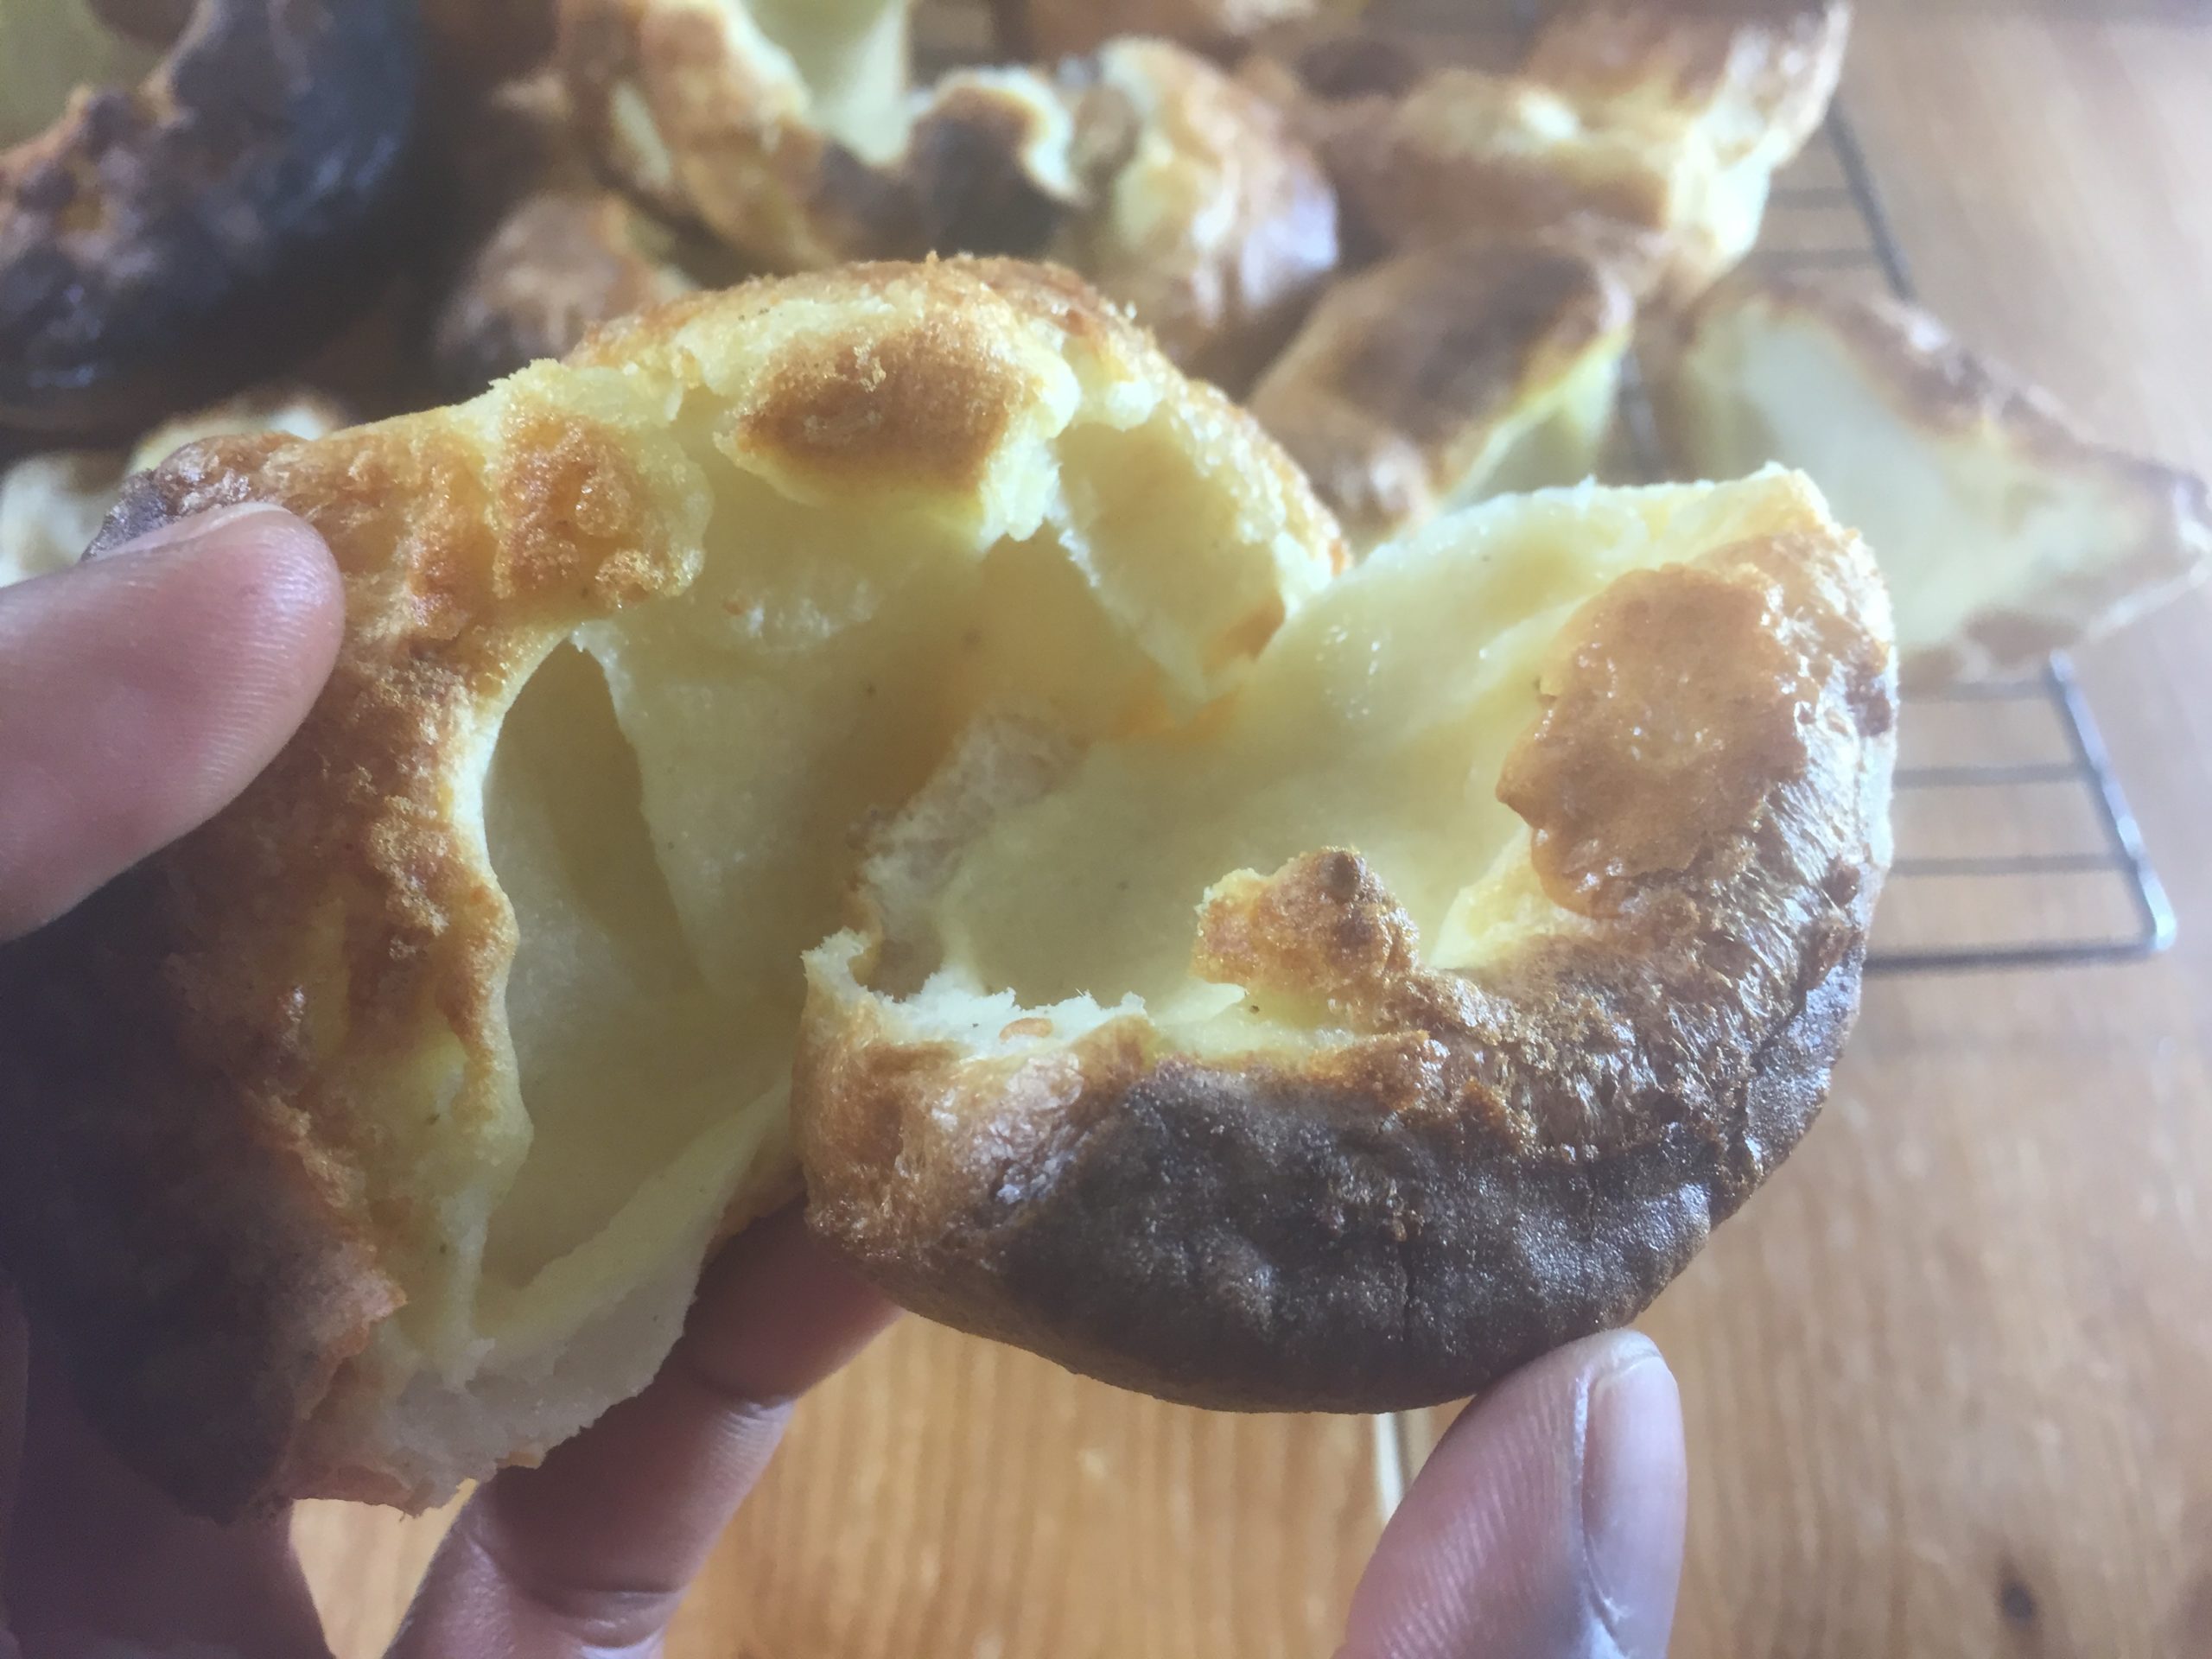 Yorkshire pudding : Yorkshire pudding recipe for 4